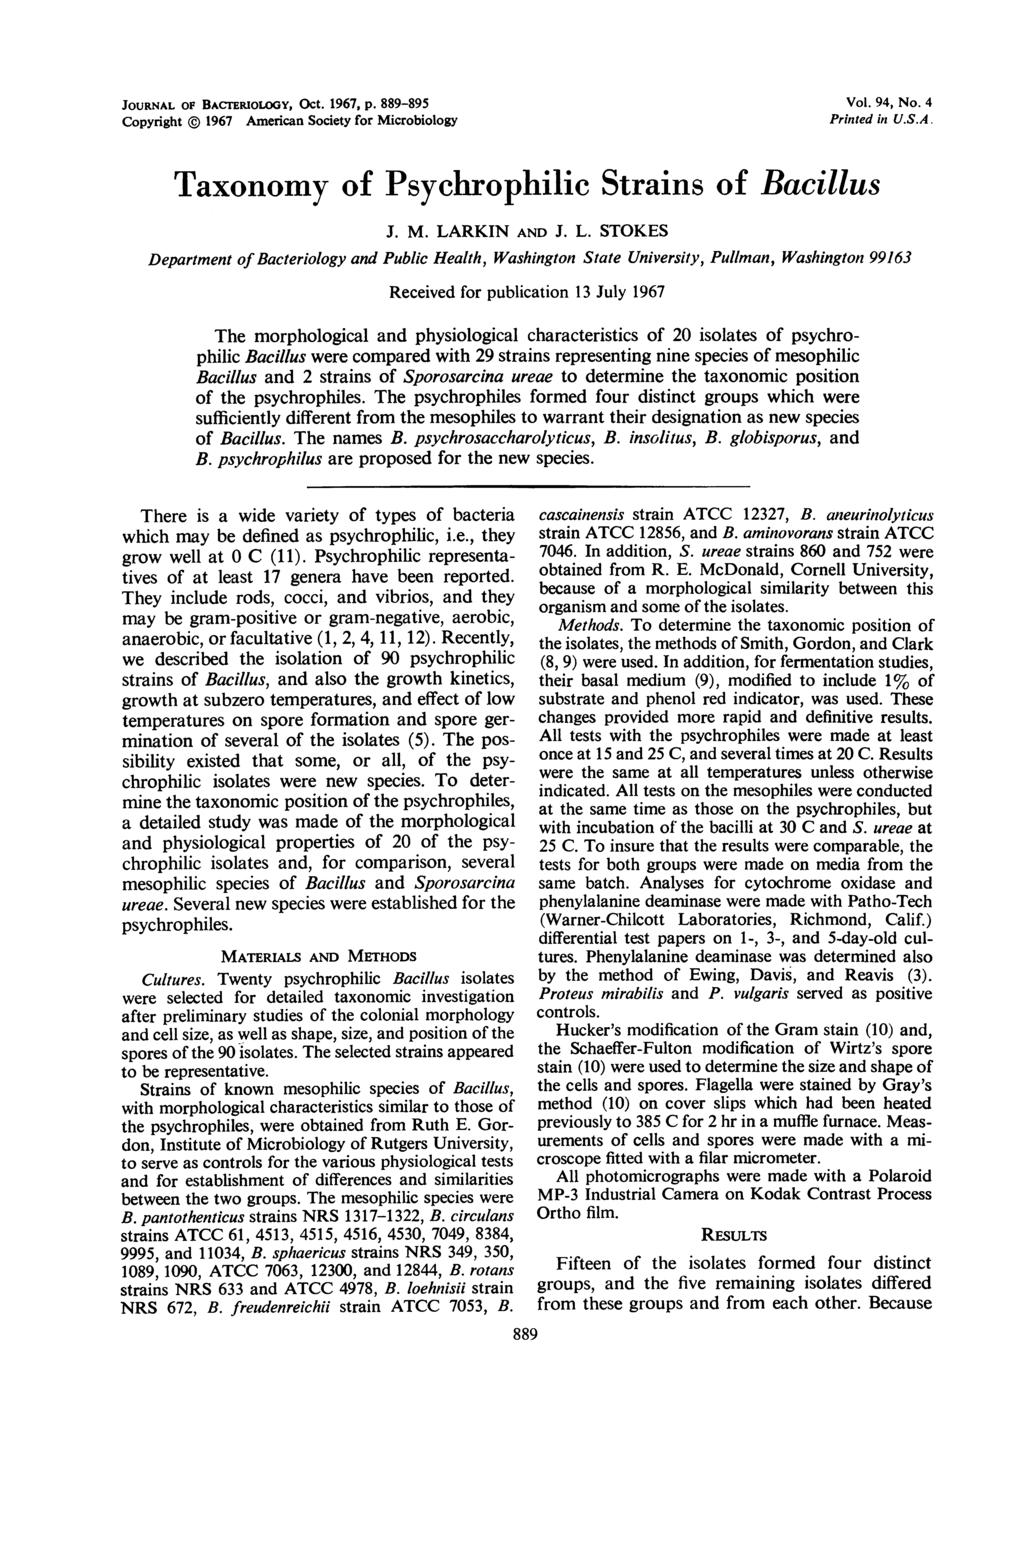 JOURNAL OF BACIERIOLOGY, Oct. 1967, p. 889-895 Copyright @ 1967 American Society for Microbiology Vol. 94, No. 4 Printed in U.S.A. Taxonomy of Psychrophilic Strains of Bacillus J. M. LA